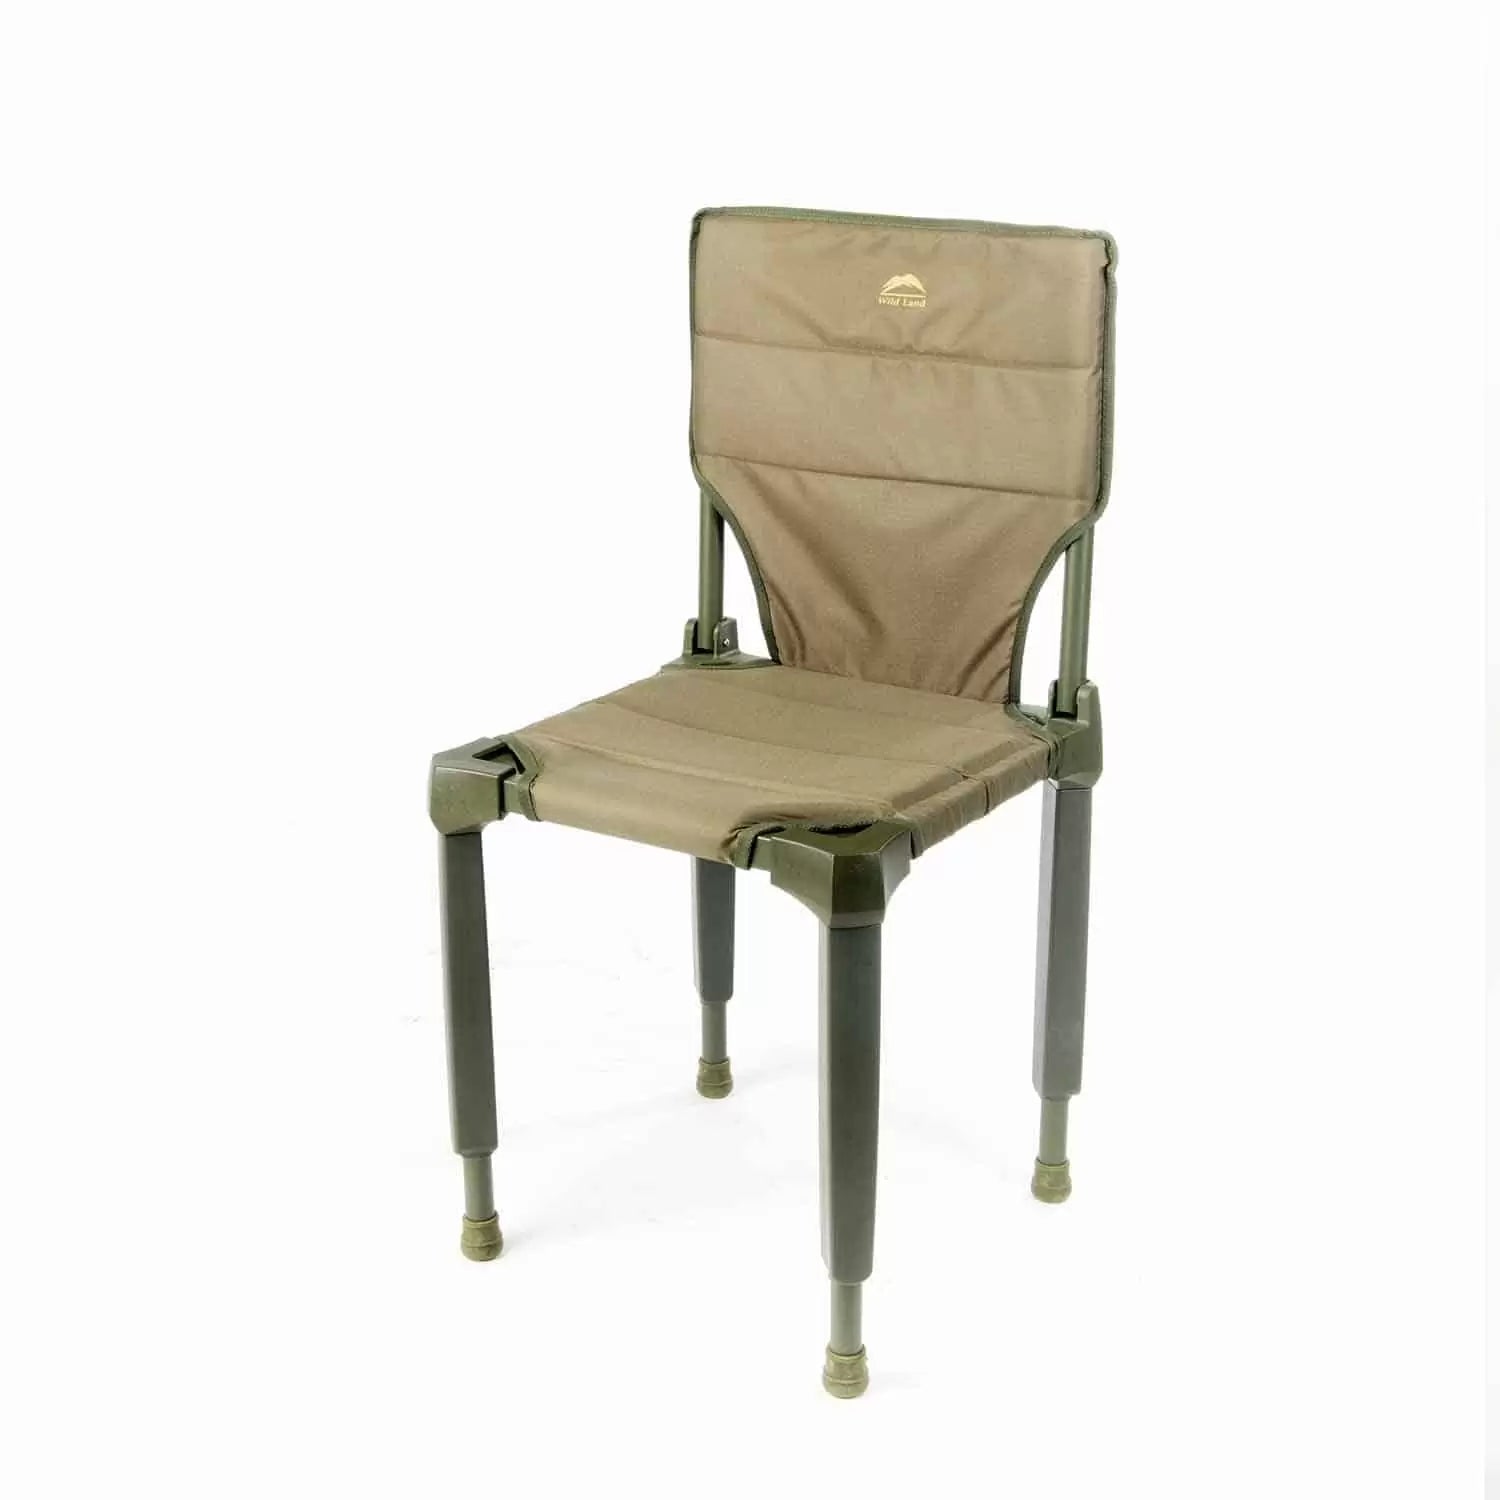 CAMPING CHAIR AWL - Trakend